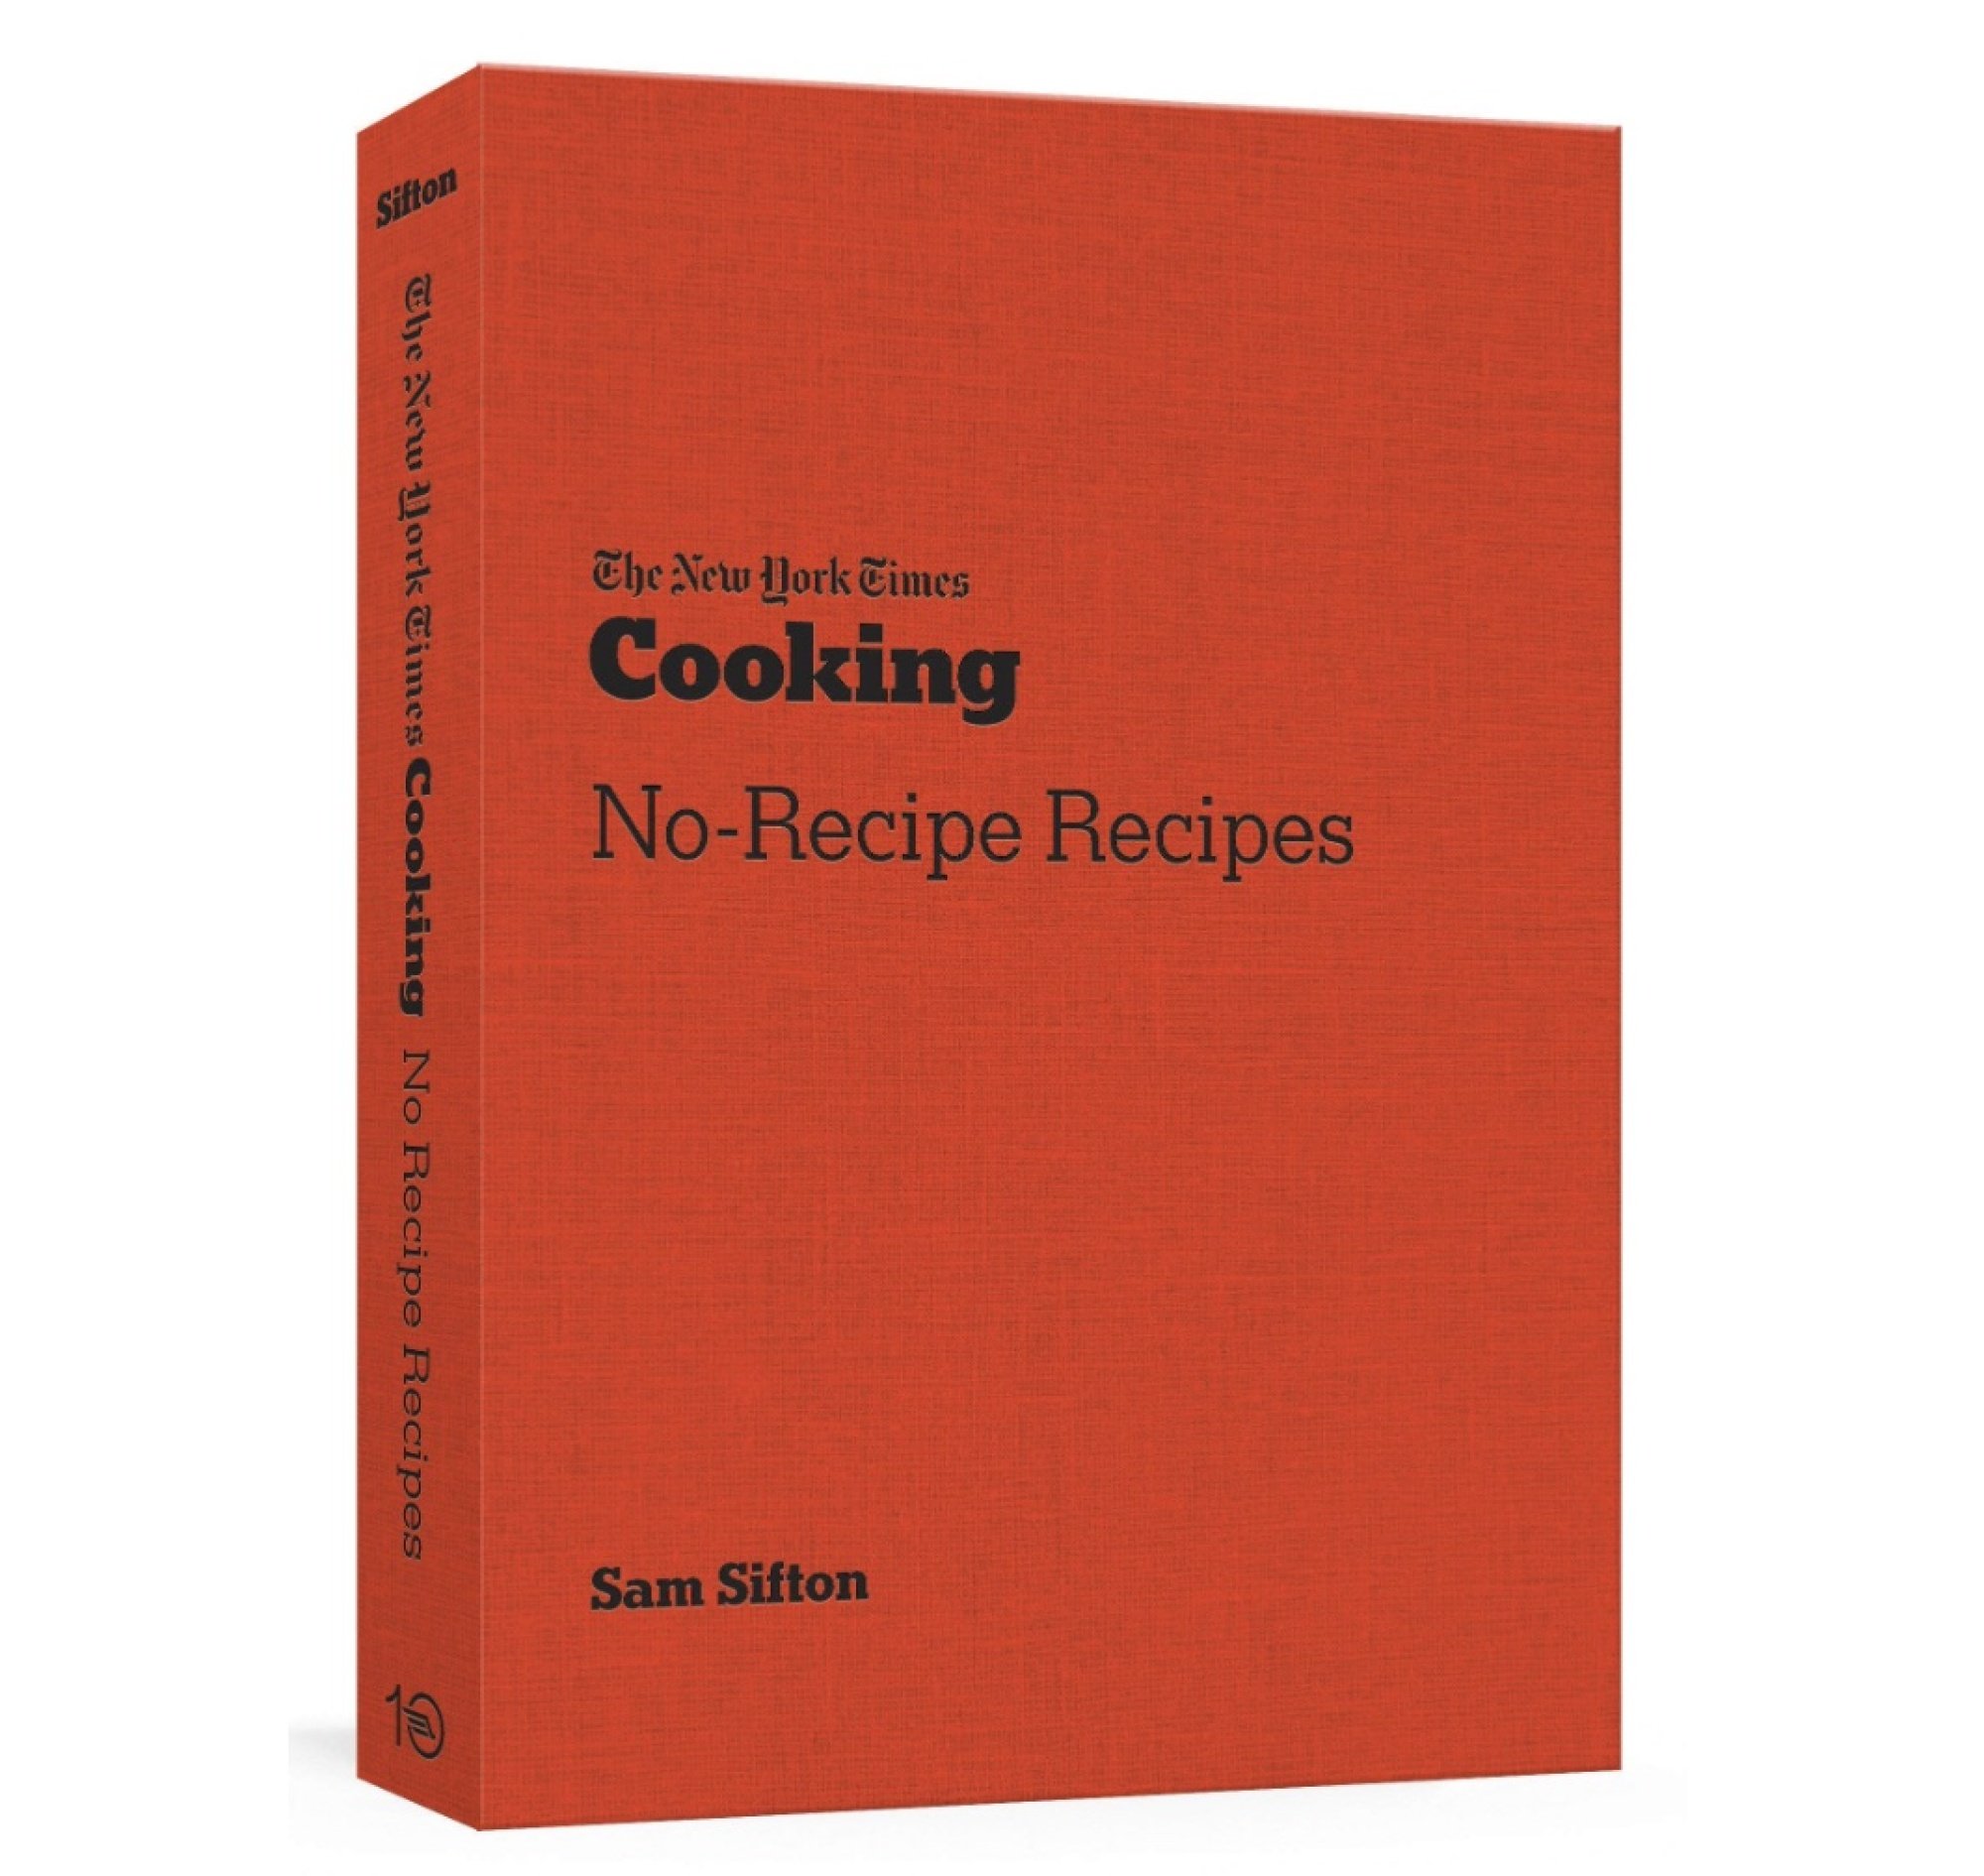 Book "The New York Times Cooking No-Recipe Recipes" on a white background.